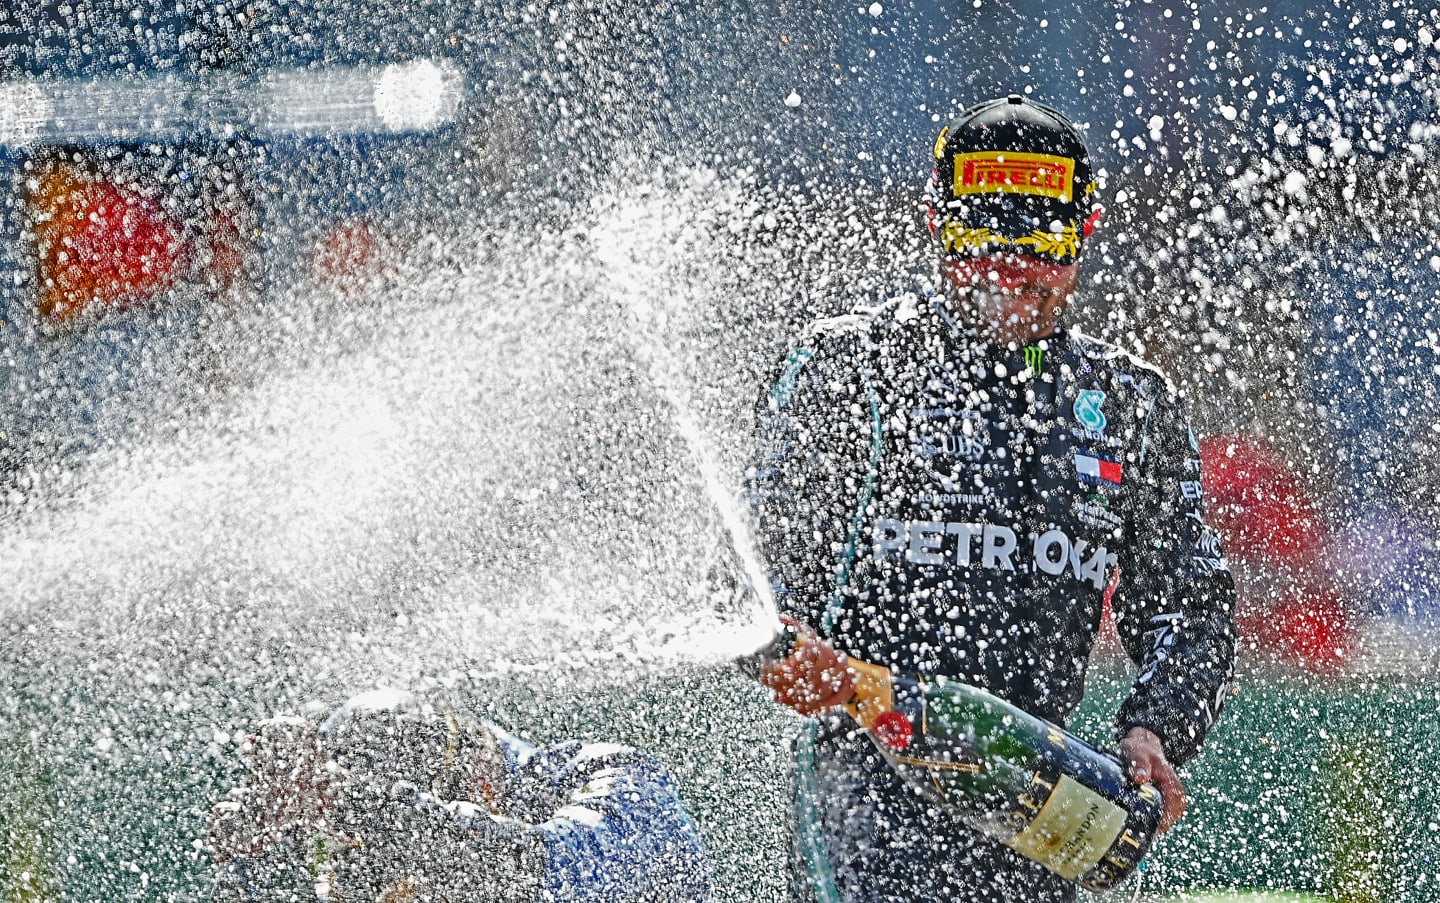 SPIELBERG, AUSTRIA - JULY 05:  Race winner Valtteri Bottas of Finland and Mercedes GP celebrates on the podium during the Formula One Grand Prix of Austria at Red Bull Ring on July 05, 2020 in Spielberg, Austria. (Photo by Clive Mason - Formula 1/Formula 1 via Getty Images)